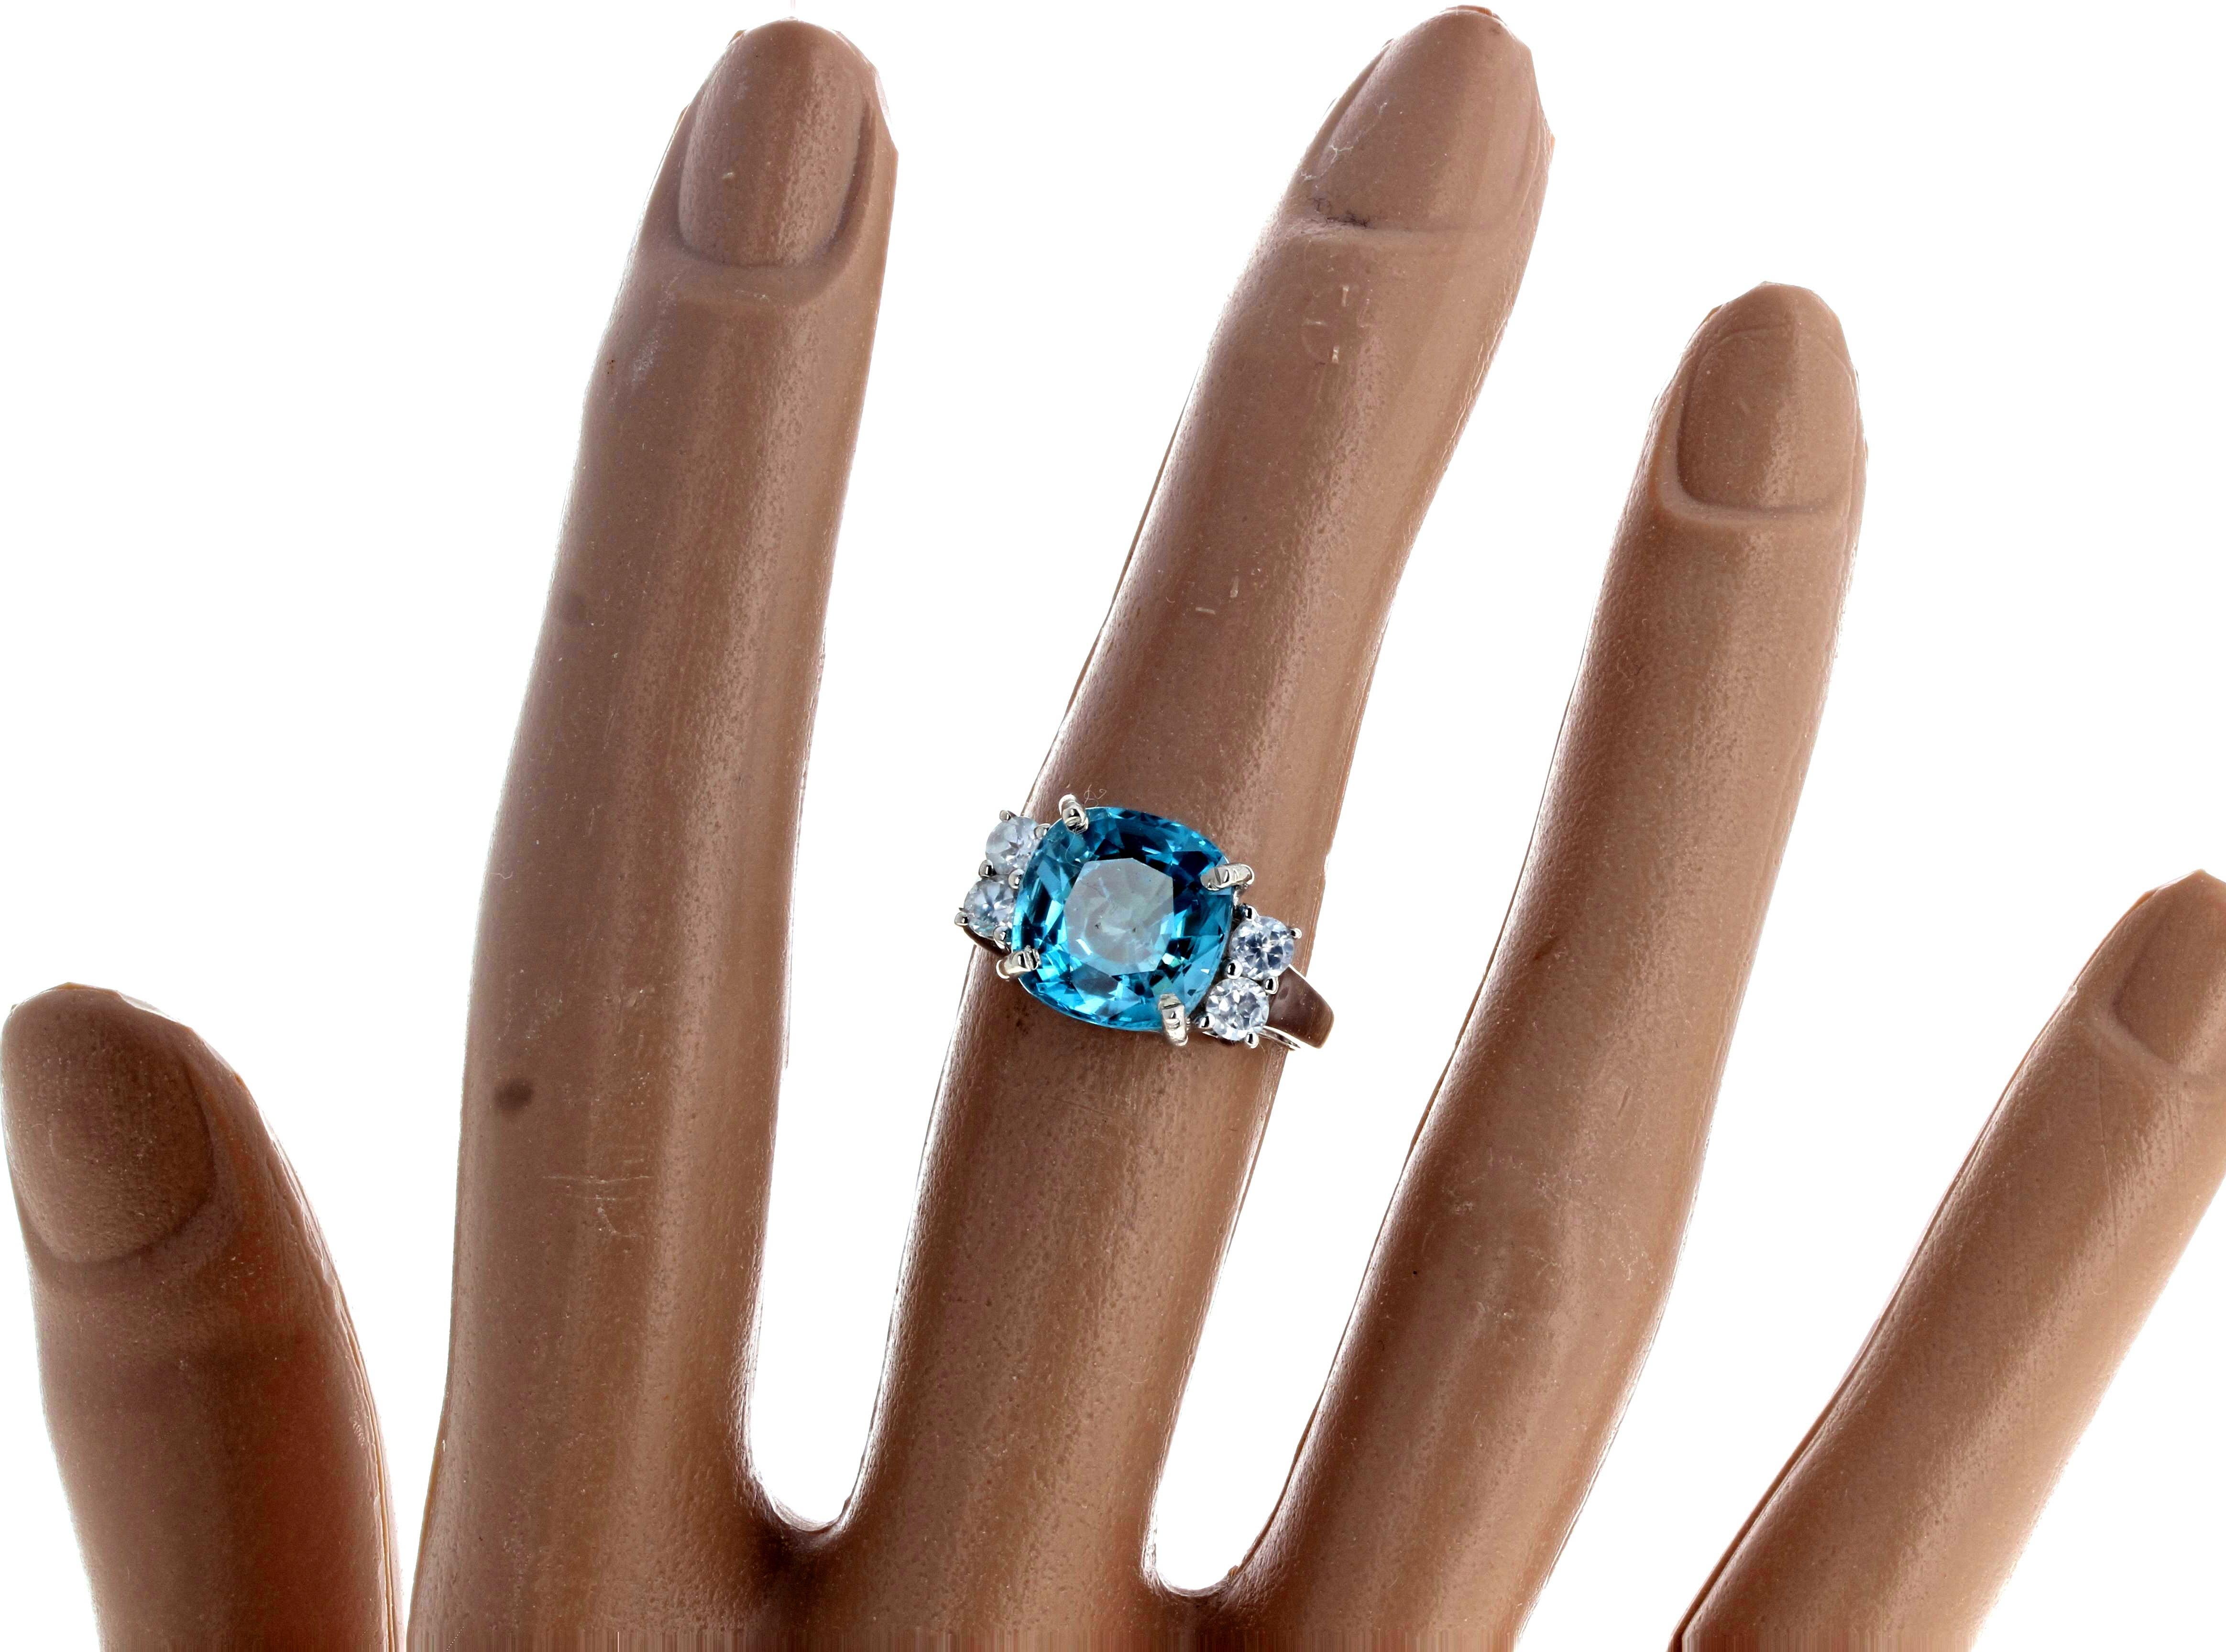 AJD Intense Blue 6.82Ct. Natural Cambodian Zircon & Real Diamonds Cocktail Ring 4